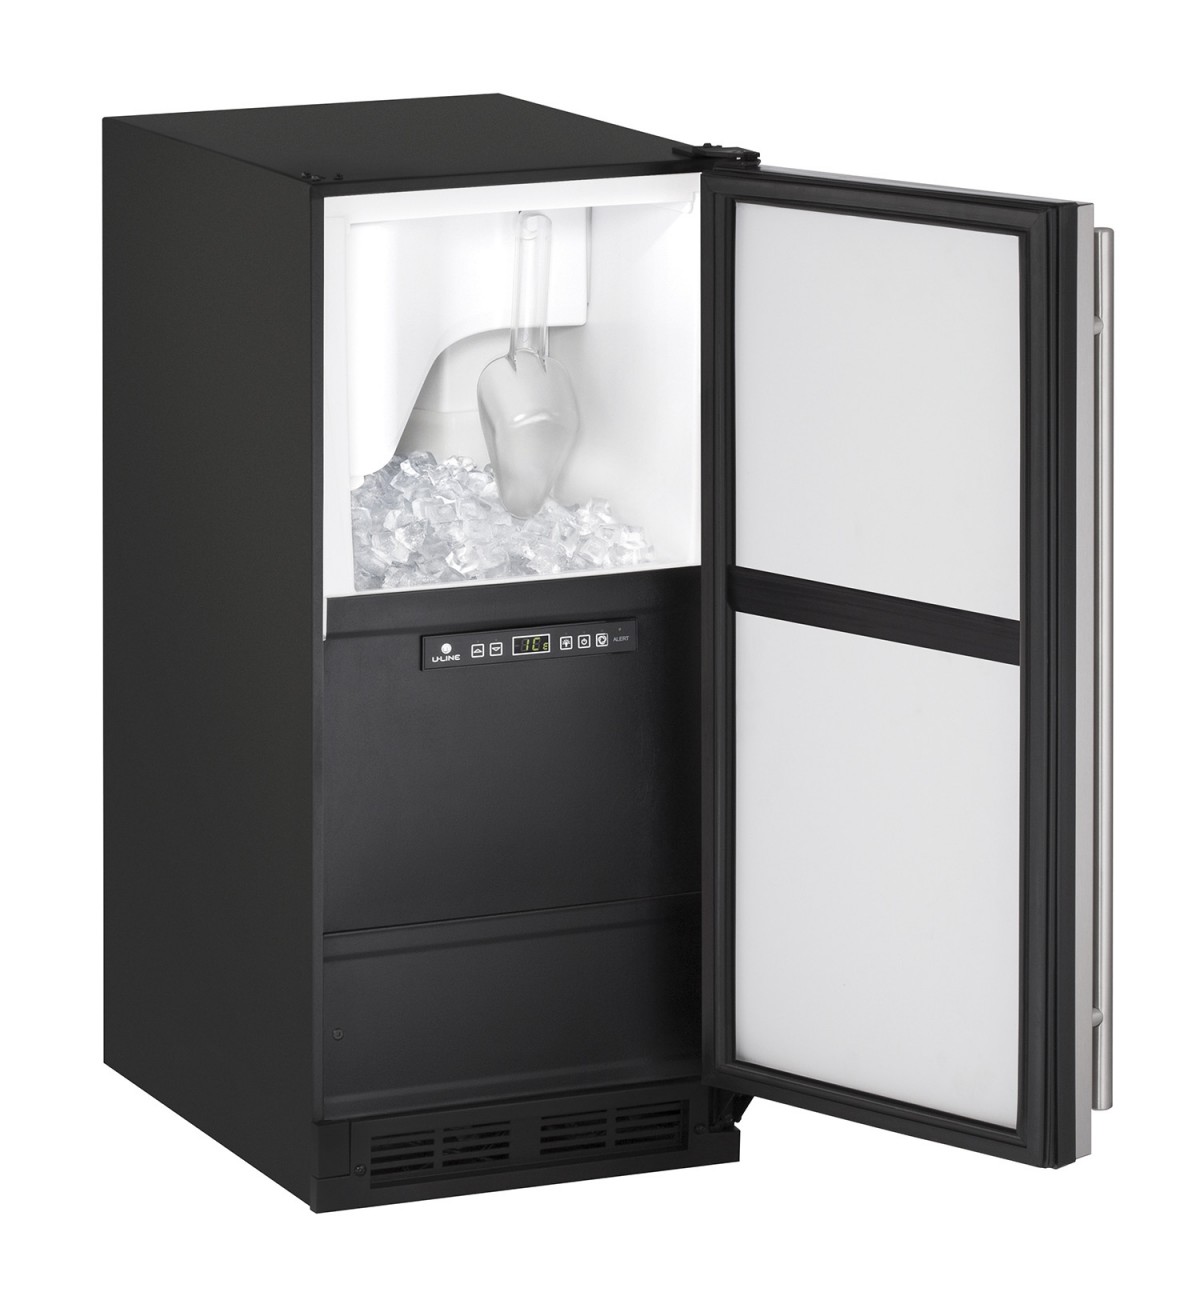 U-Line 1000 Series 15 Inch Clear Cube Ice Maker - The Flawless Host